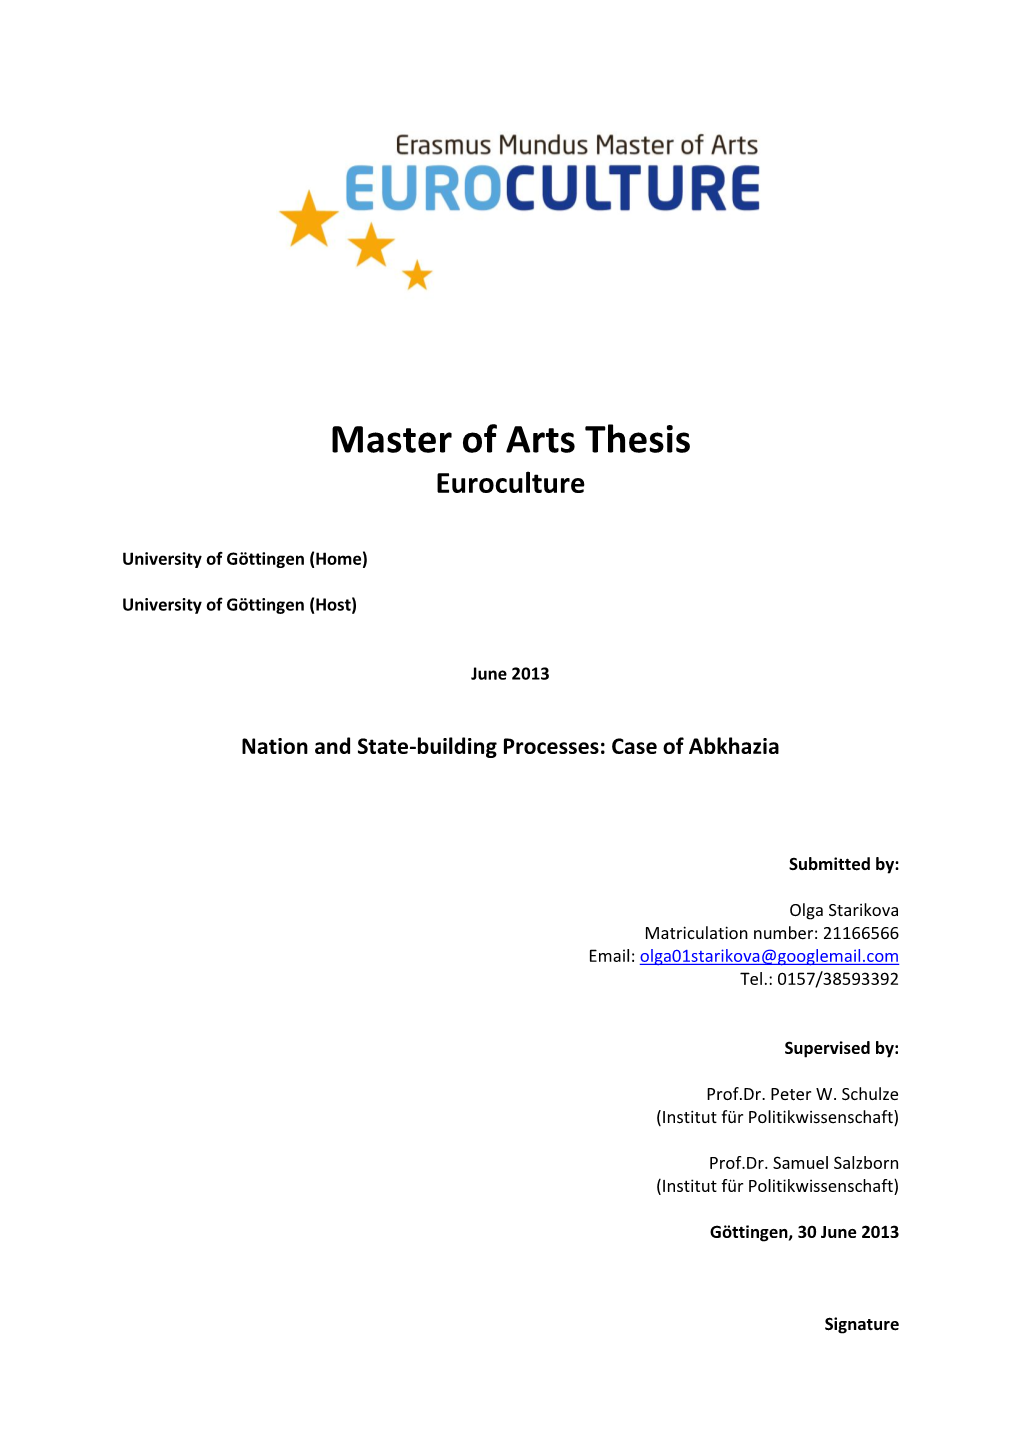 Master of Arts Thesis Euroculture